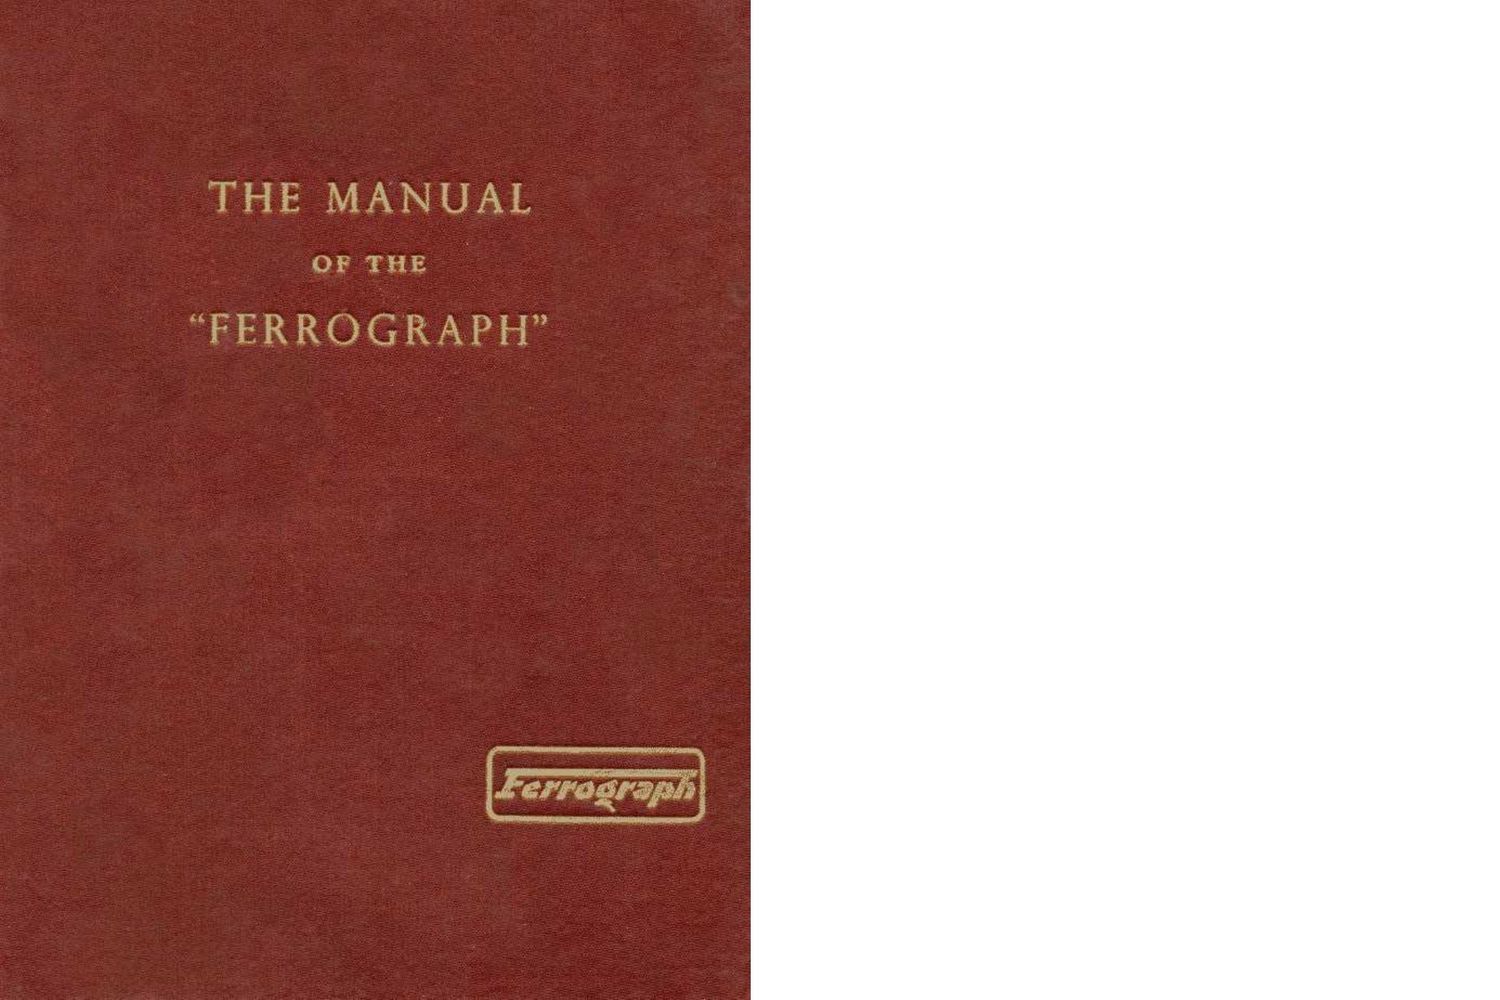 Ferrograph 2 A NH Owners Manual